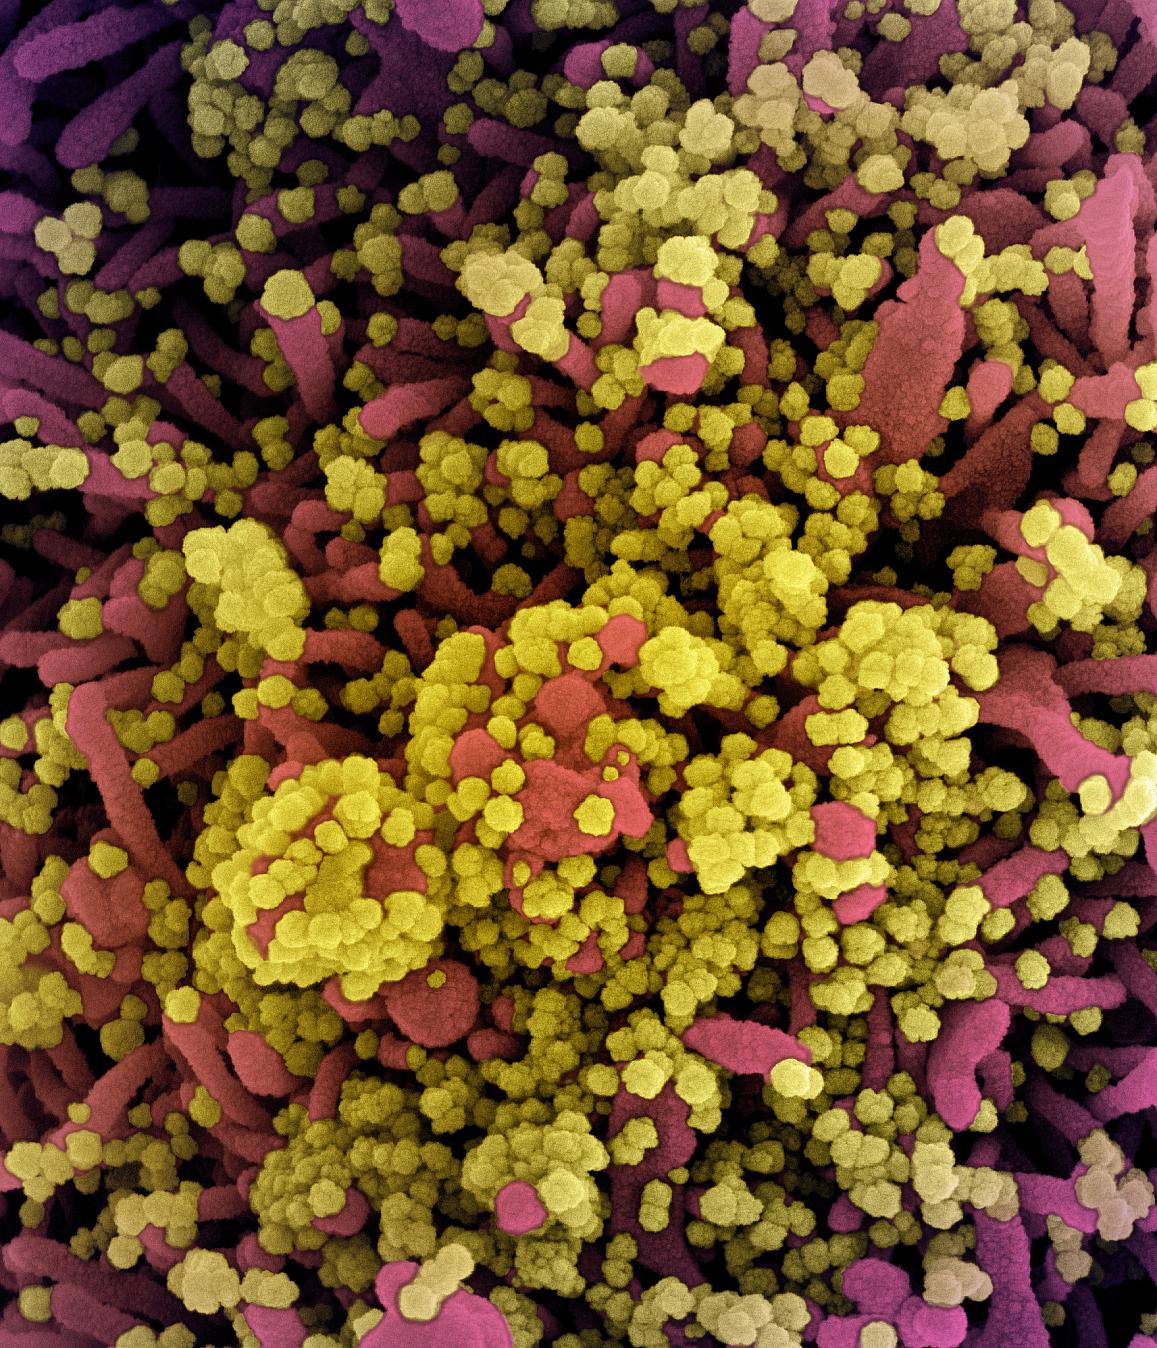 A cell heavily infected with SARS-CoV-2 virus particles (yellow).